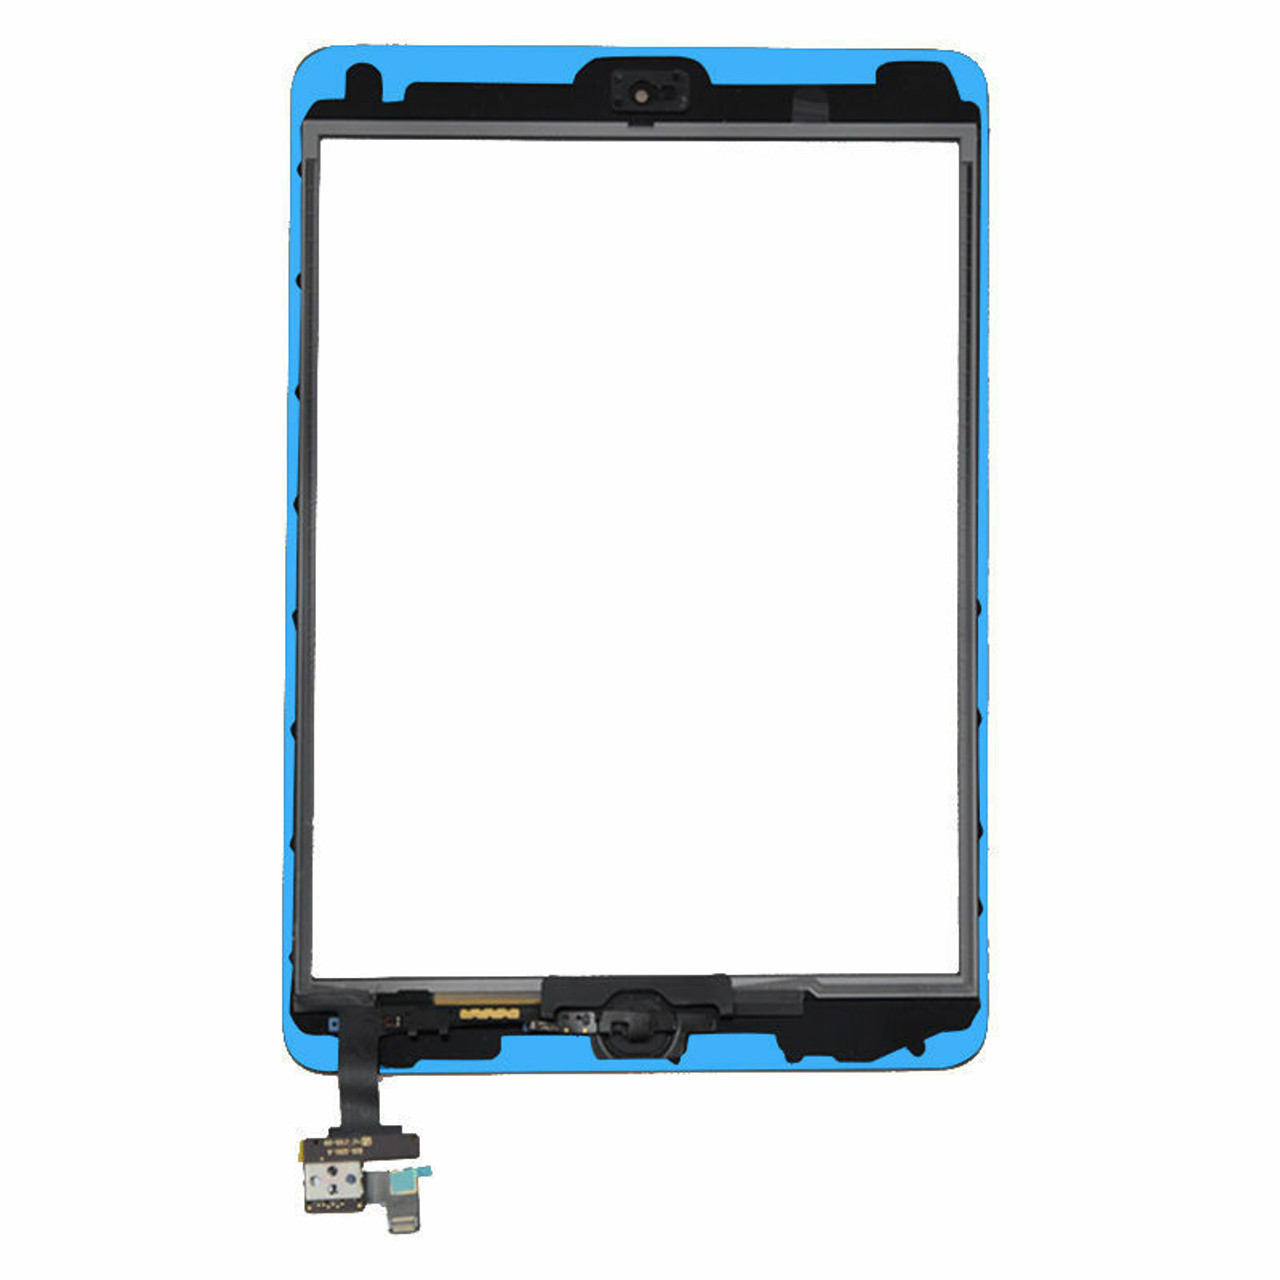 OEM SPEC Black Touch Glass Digitizer Screen Home Button IC For iPad Mini 1 2 NEW